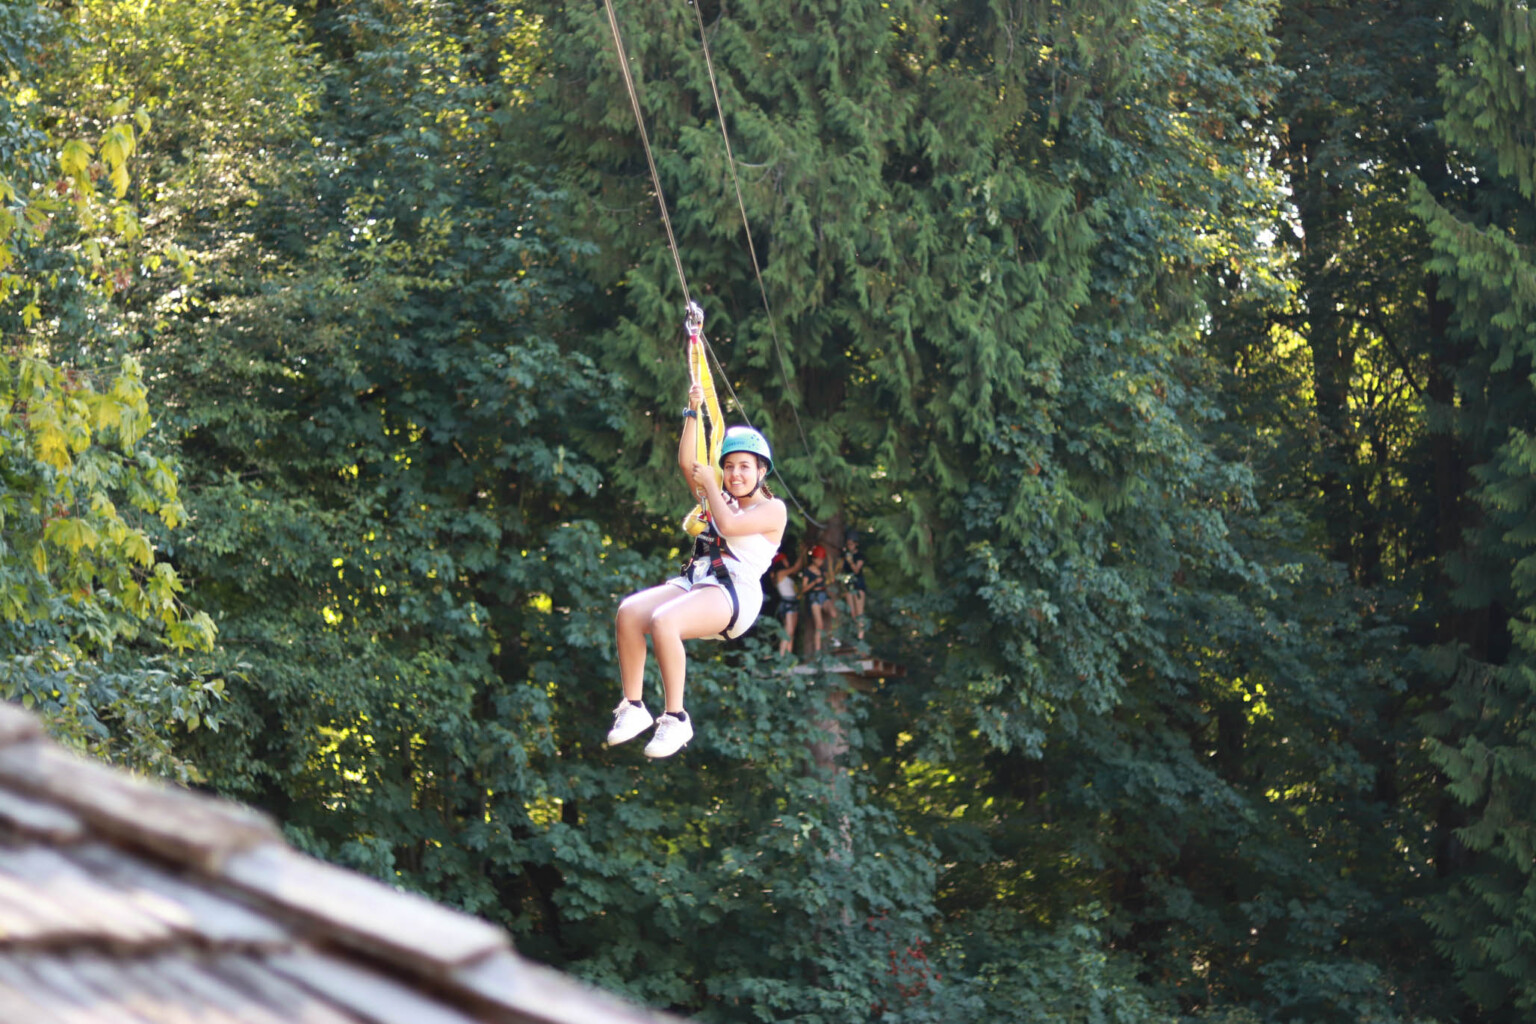 kid riding on a zip line.